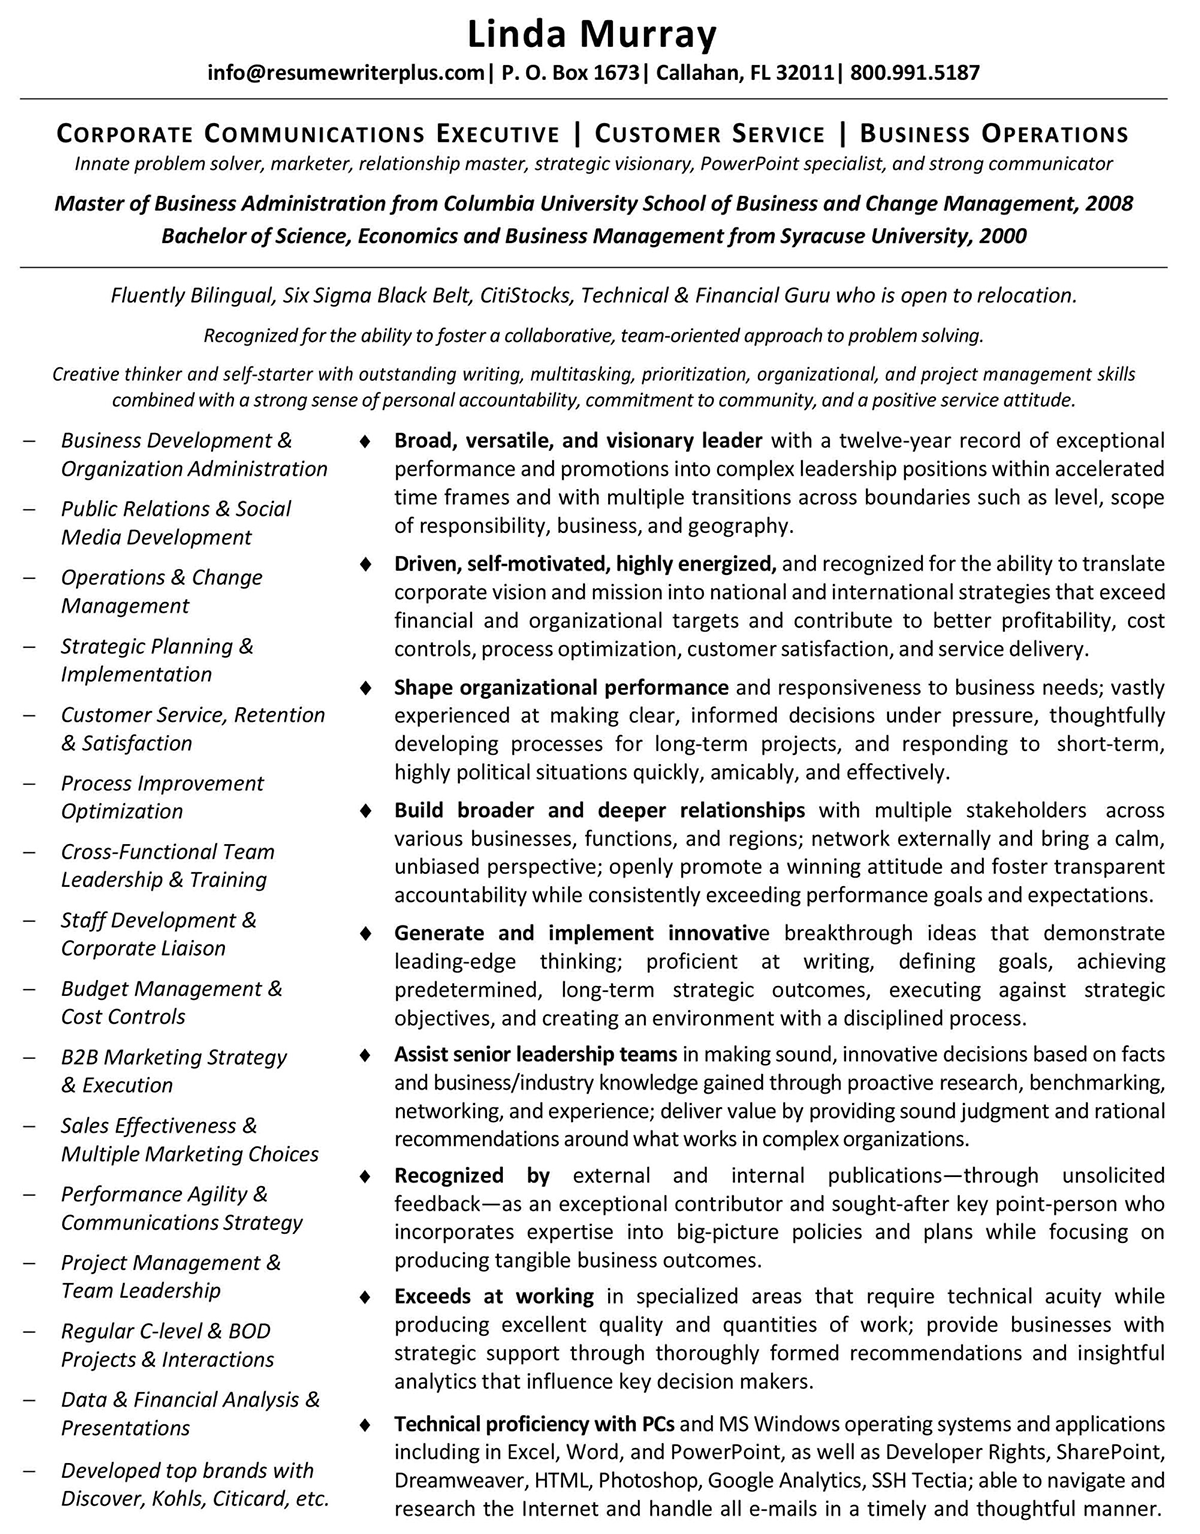 Corporate-Communications-Executive-Customer-Service-Business-Operations-Resume-1